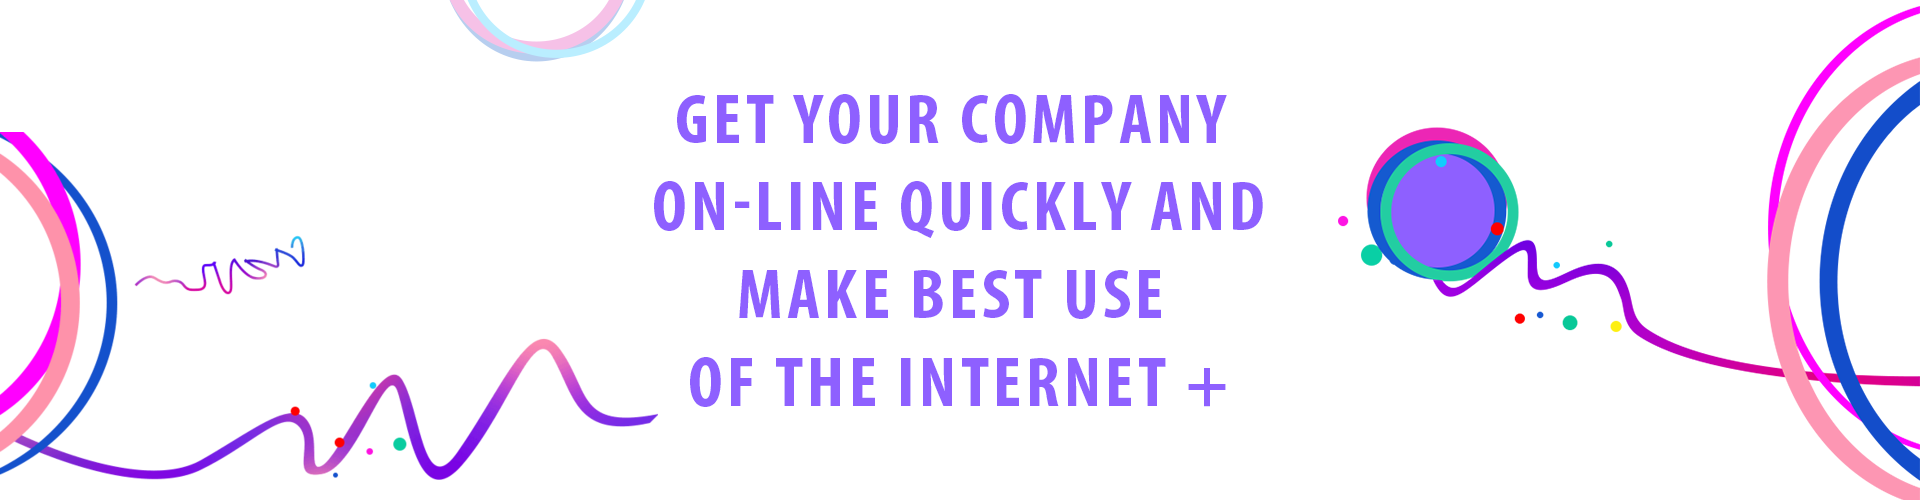 get your company on-line quickly and make best use of the internet+